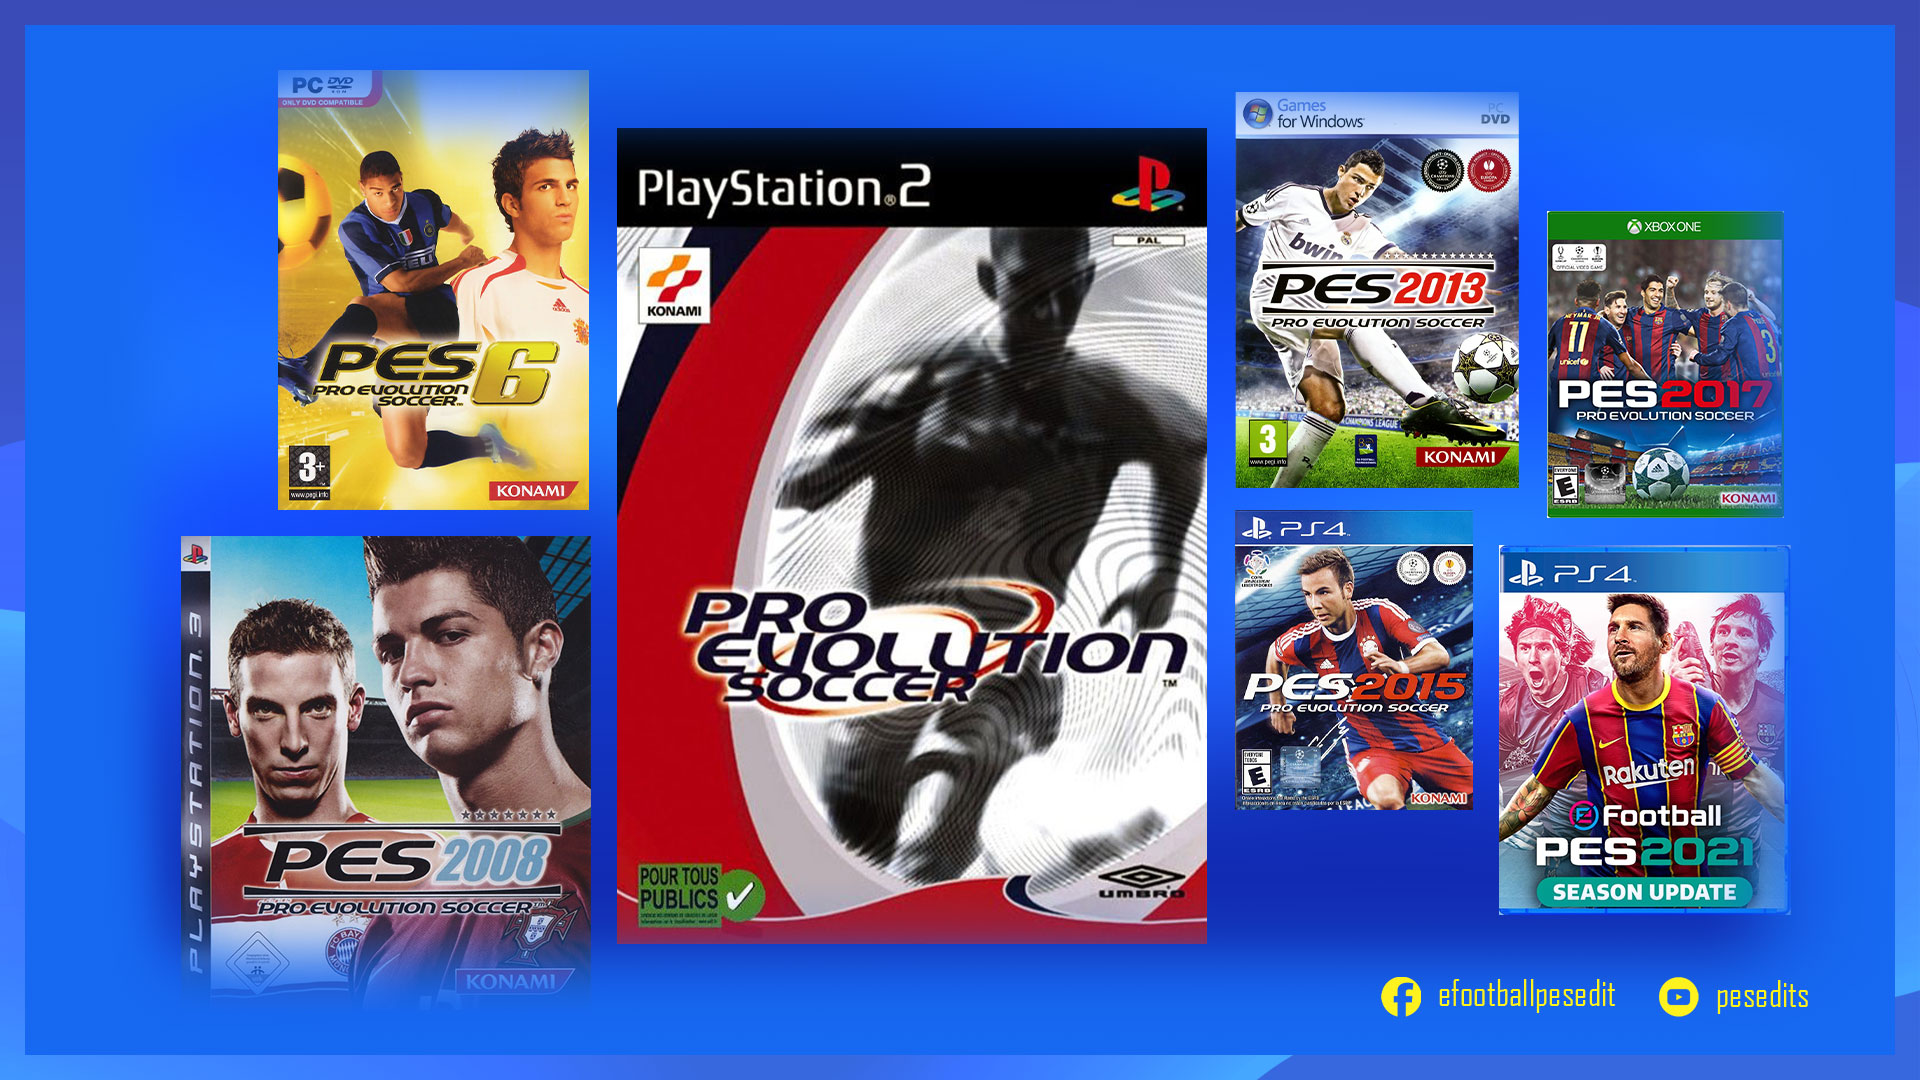 Pro Evolution Soccer: A Look Back at its History